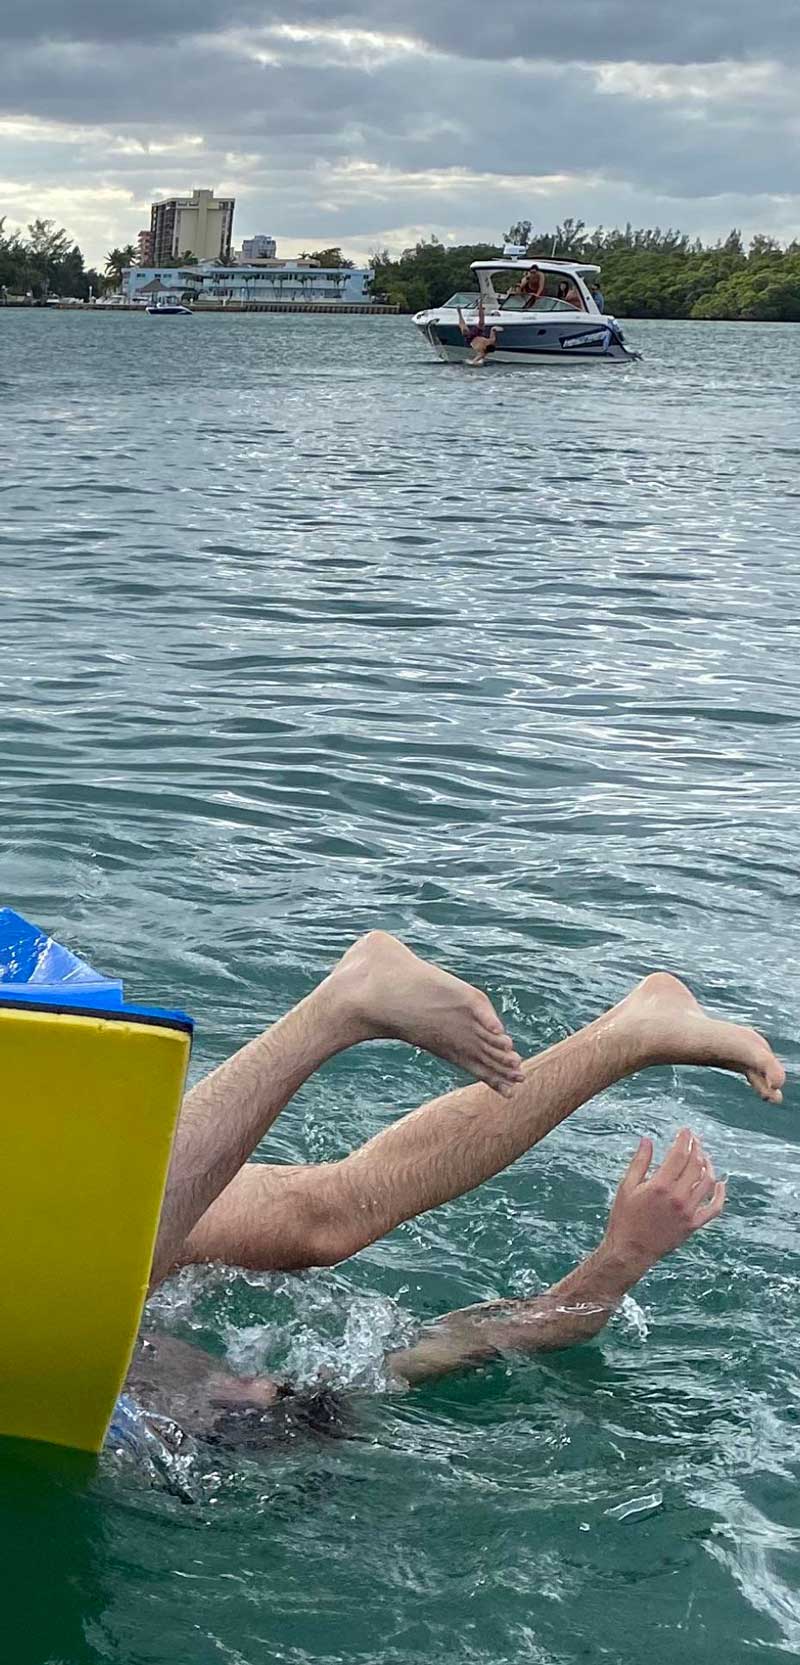 I got a pic of my boyfriend falling off a floaty and just realized there was a guy falling off a boat at the same time